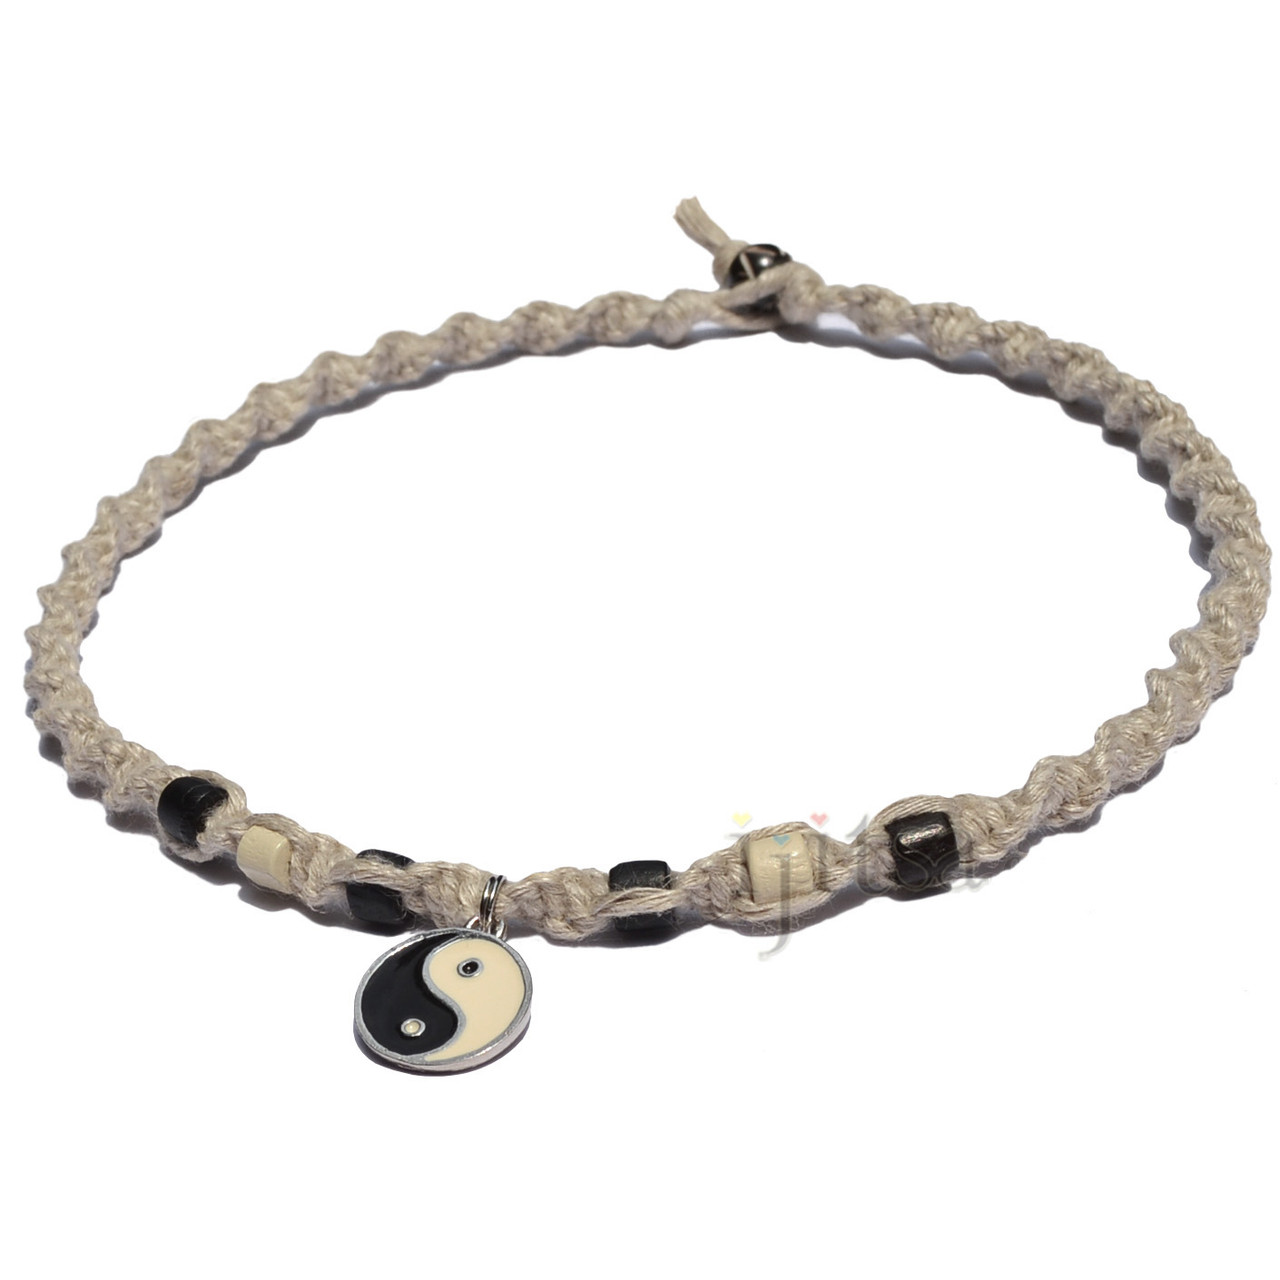 Natural twisted hemp necklace with yin yang charm